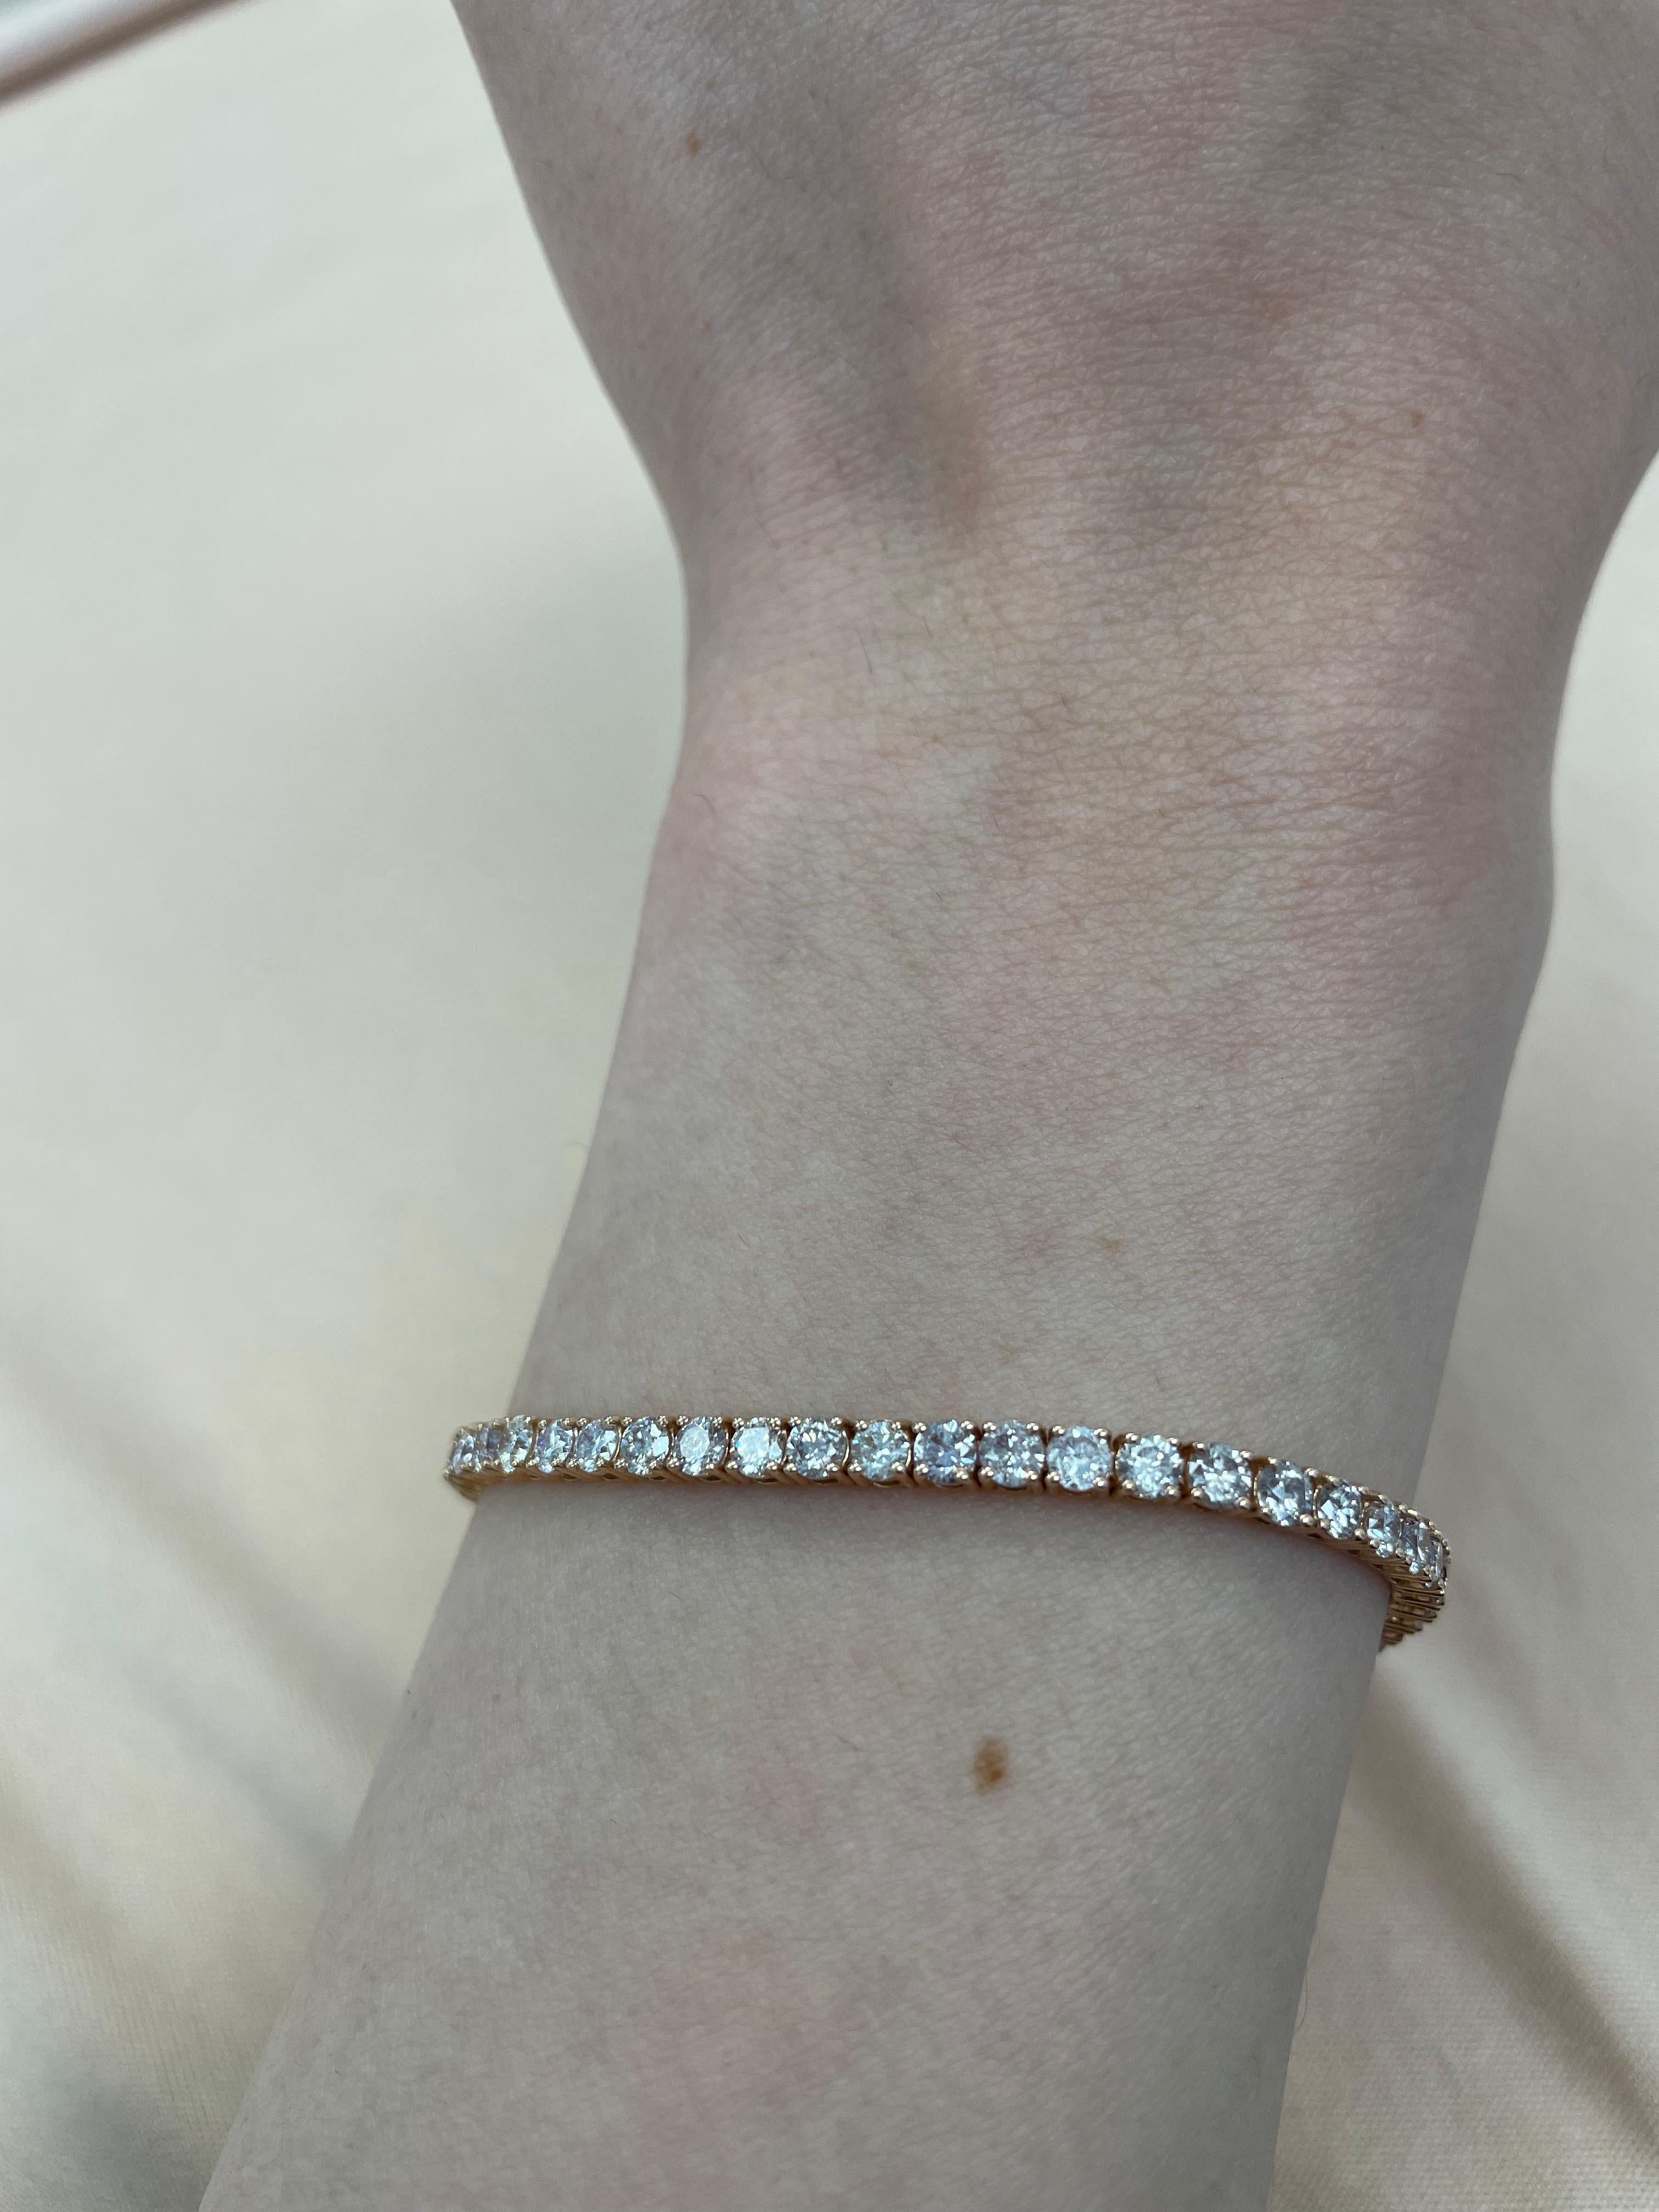 Exquisite and timeless diamonds tennis bracelet, by Alexander Beverly Hills.
59 round brilliant diamonds, 5.18 carats total. Approximately Very Light Pink color (looks like regular white in mounting) and SI clarity. Four prong set in 14k rose gold,